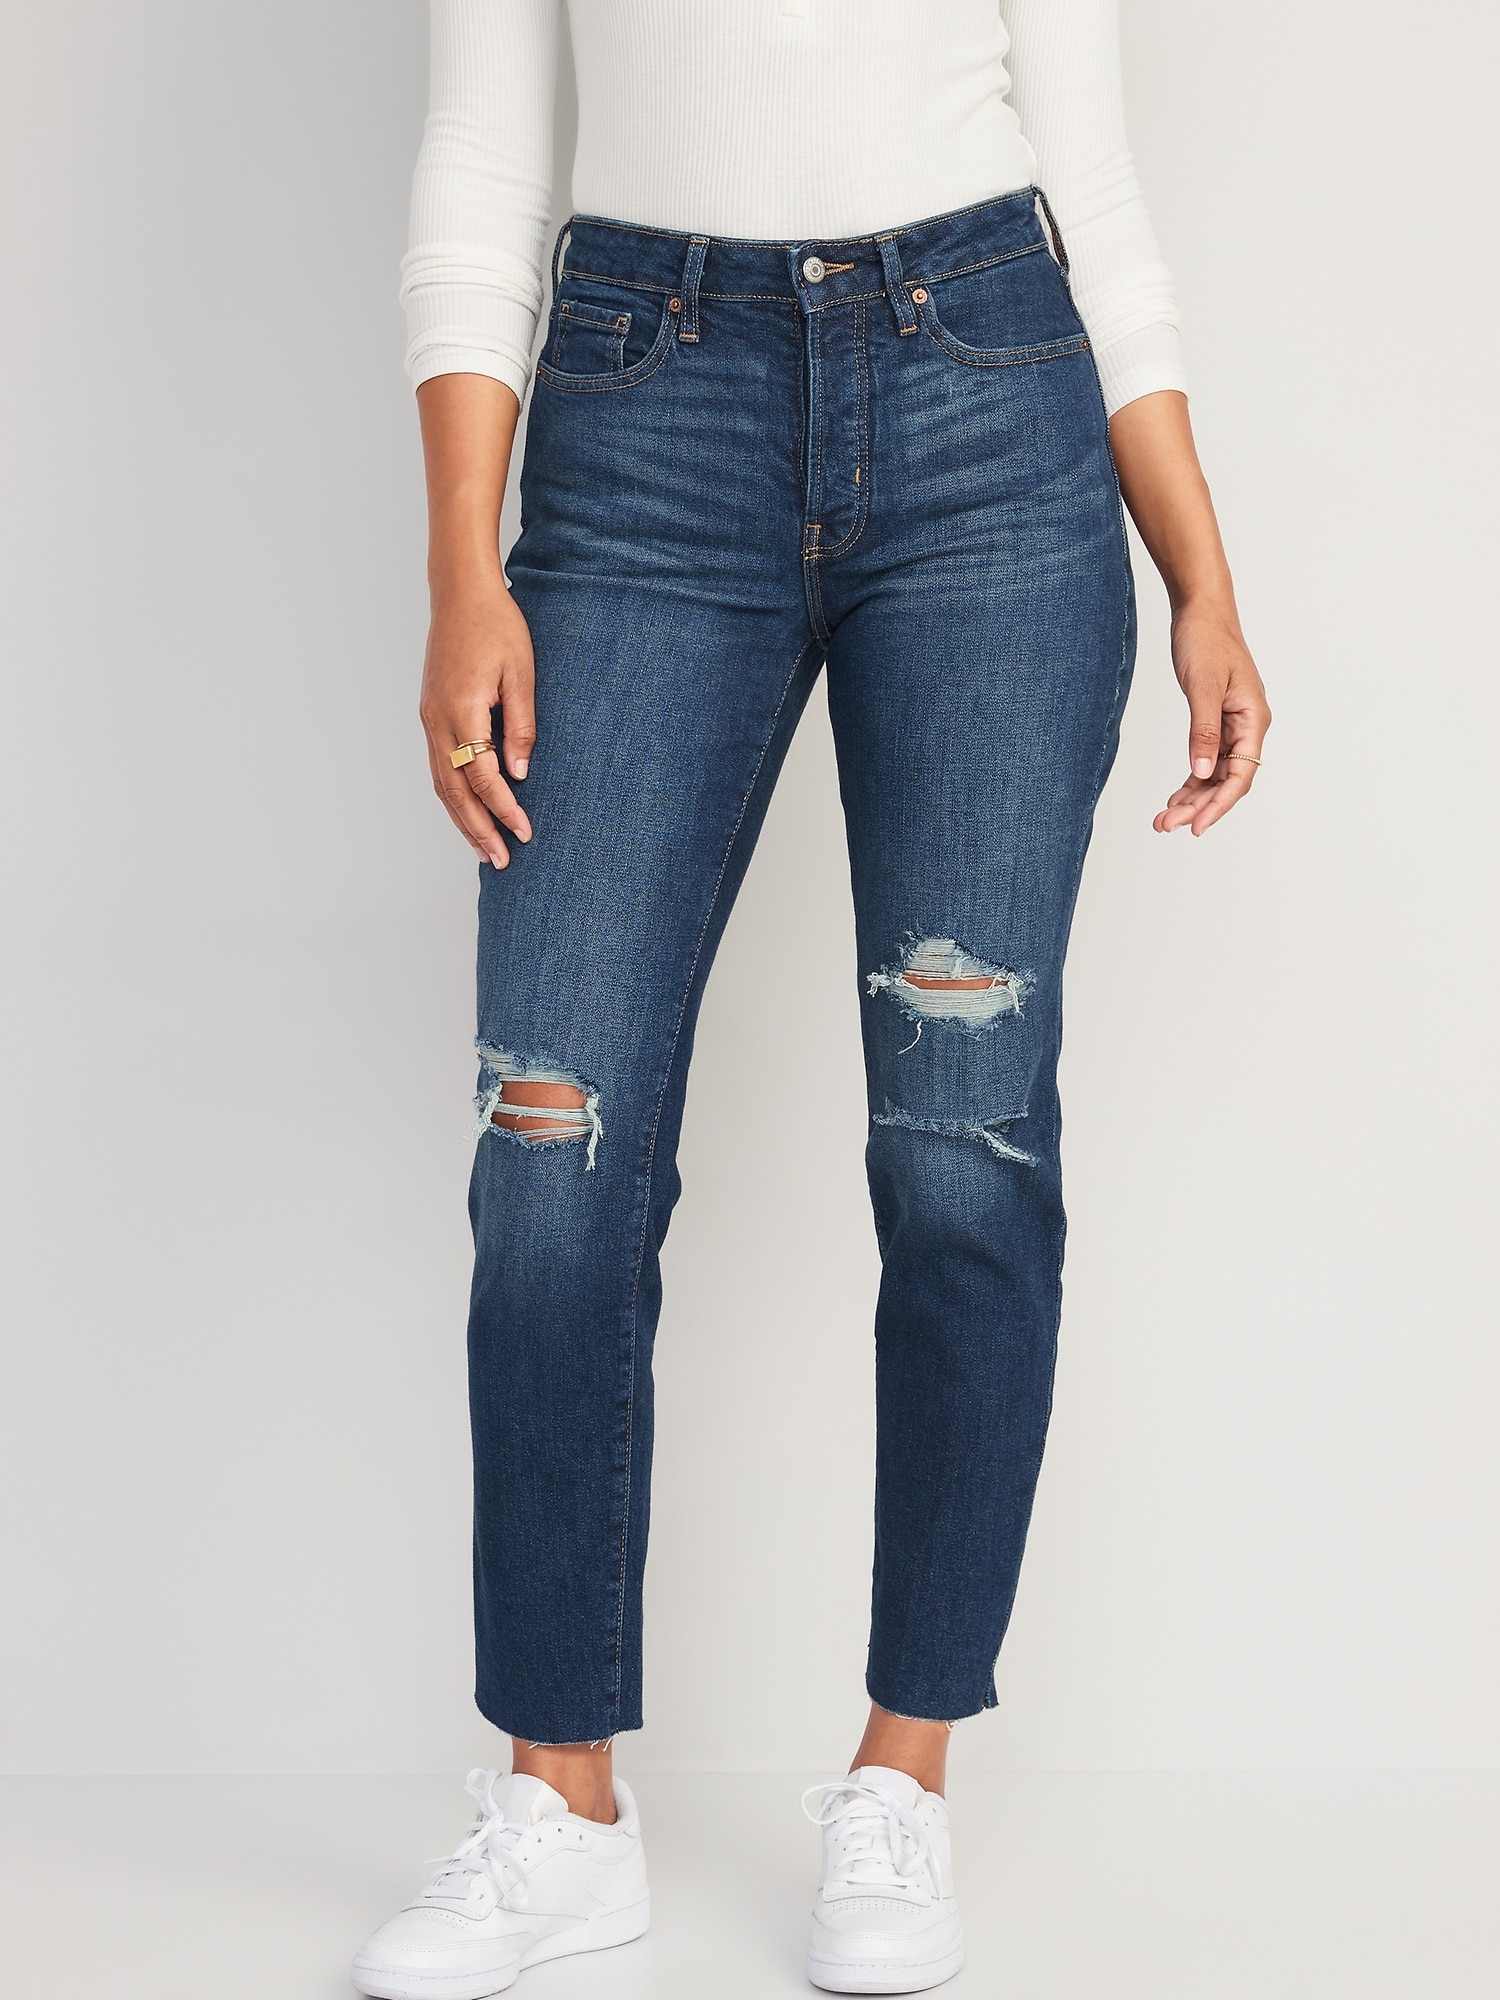 High-Waisted Button-Fly O.G. Straight Ripped Cut-Off Jeans